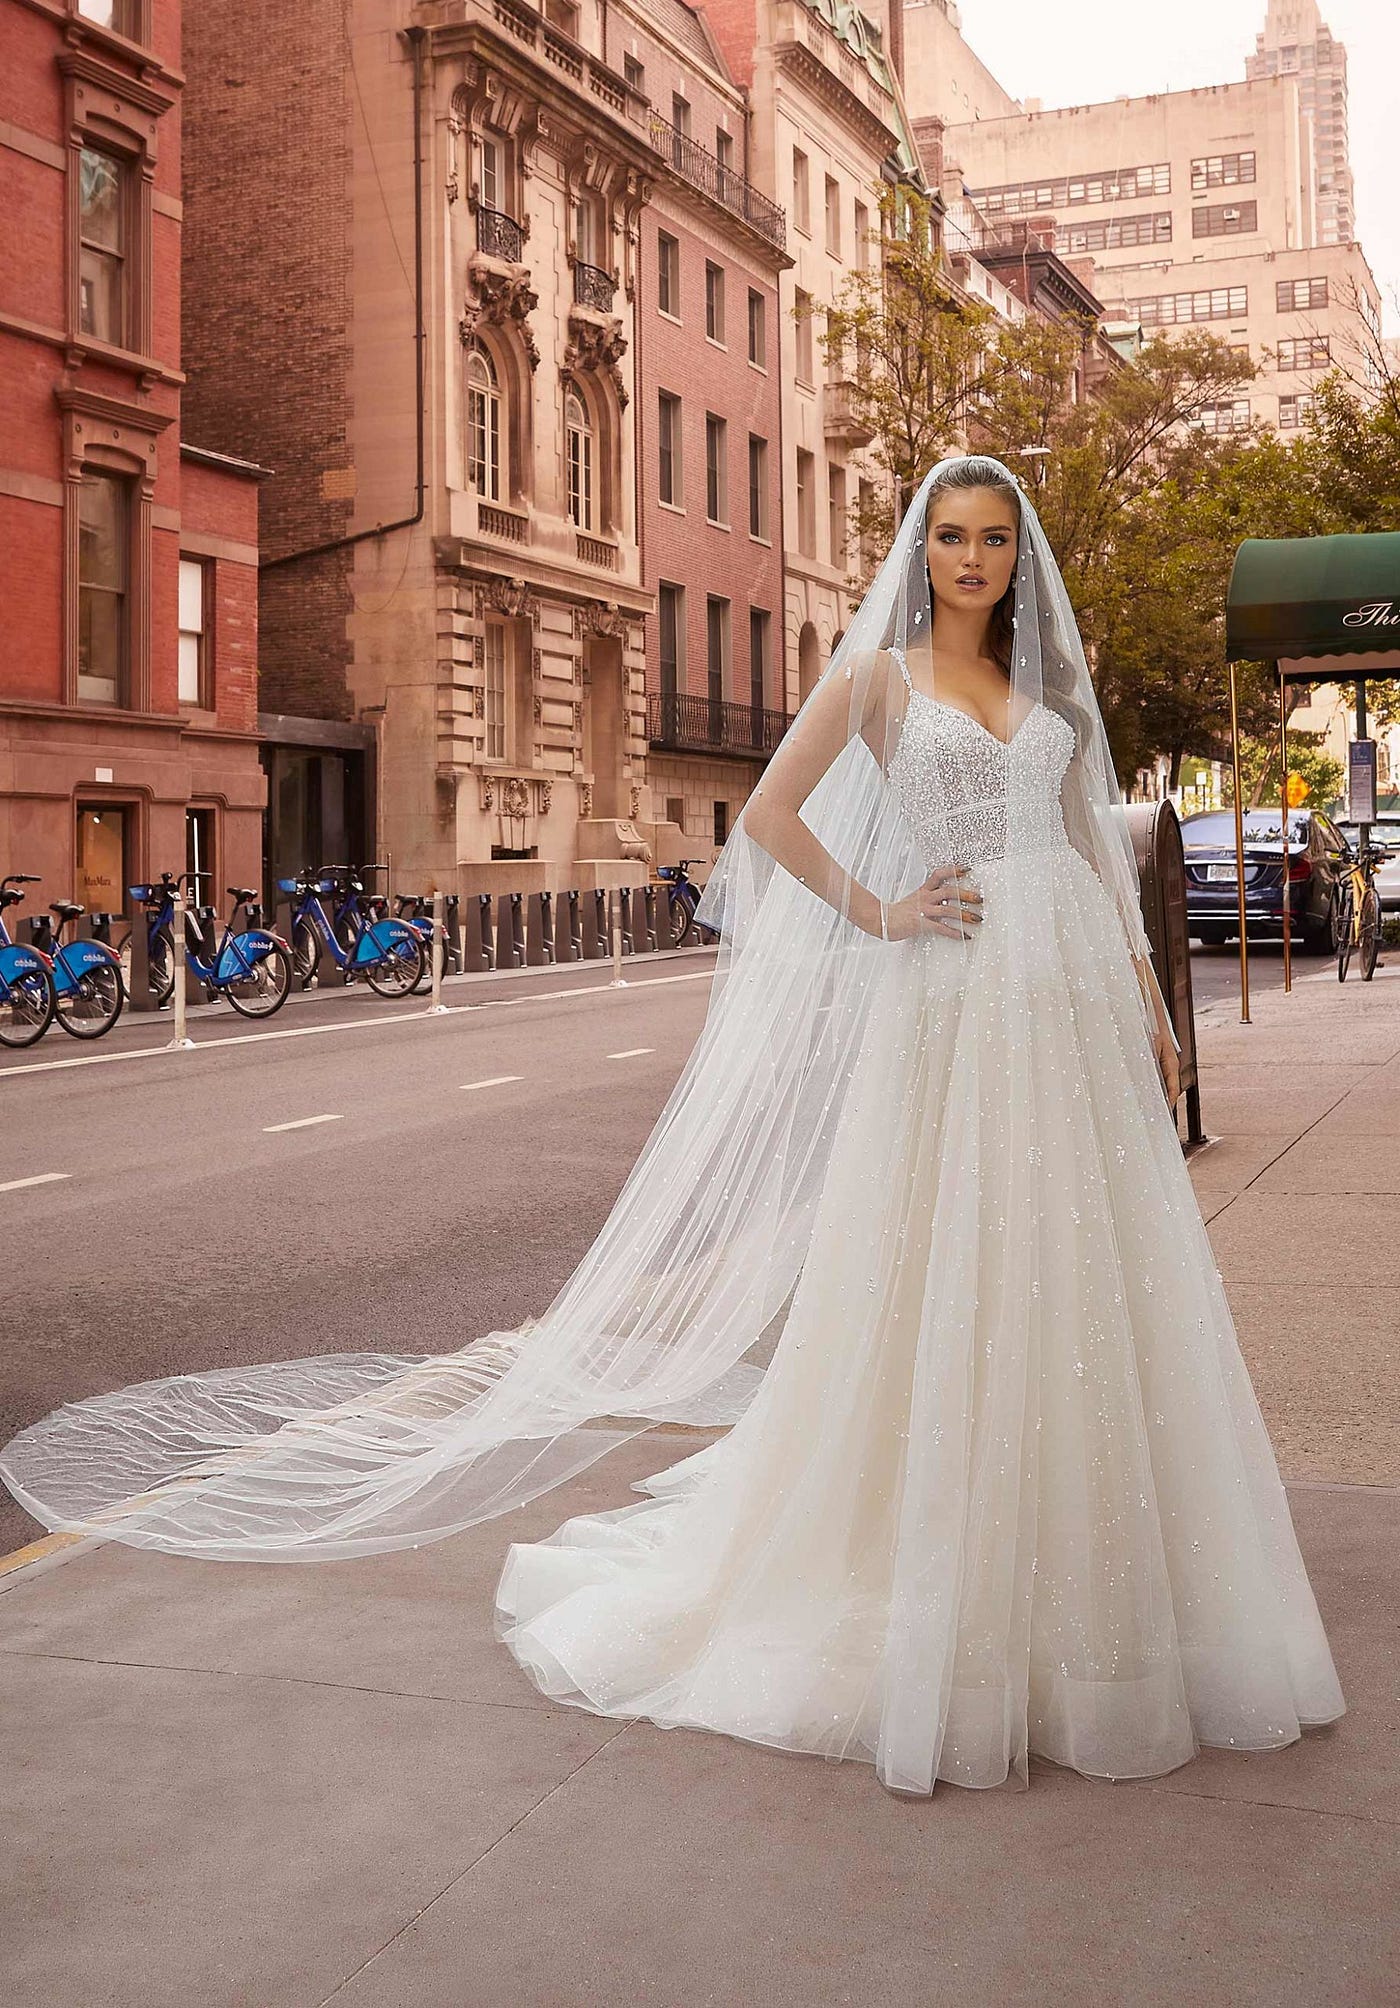 Make Your Wedding Day Unforgettable with Mori Lee Wedding Dresses